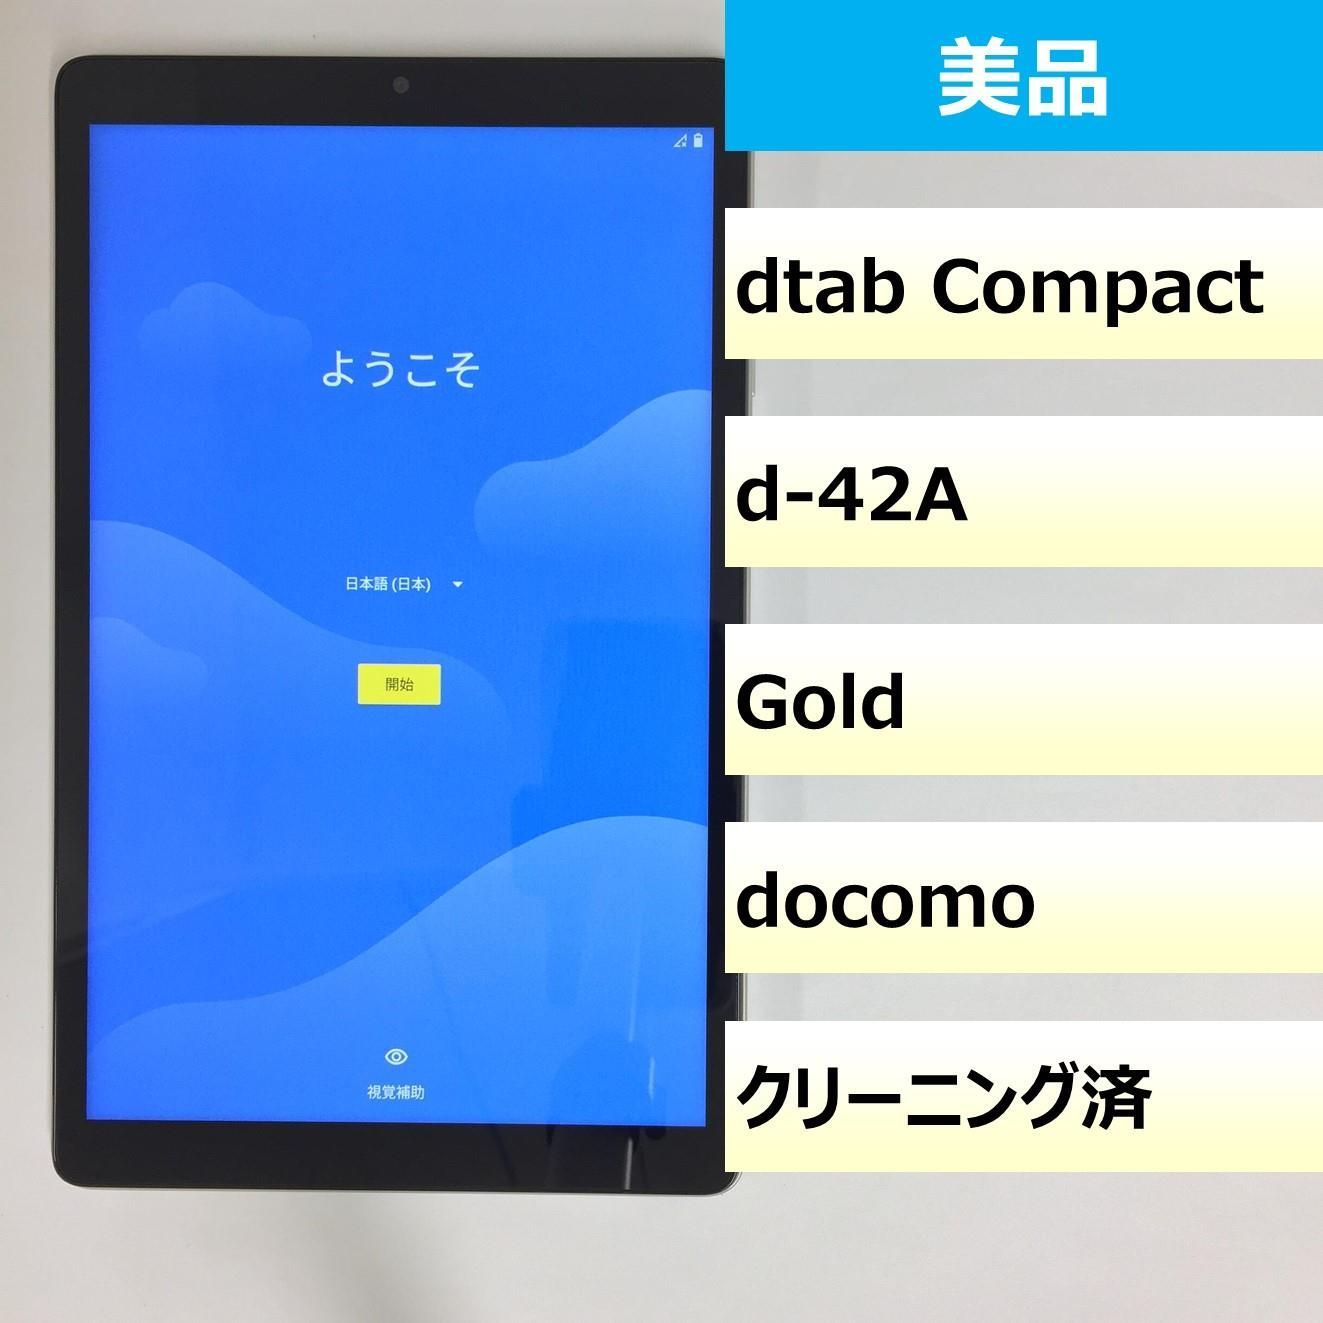 dtab Compact d-42A タブレット SIMロック解除済 - タブレット